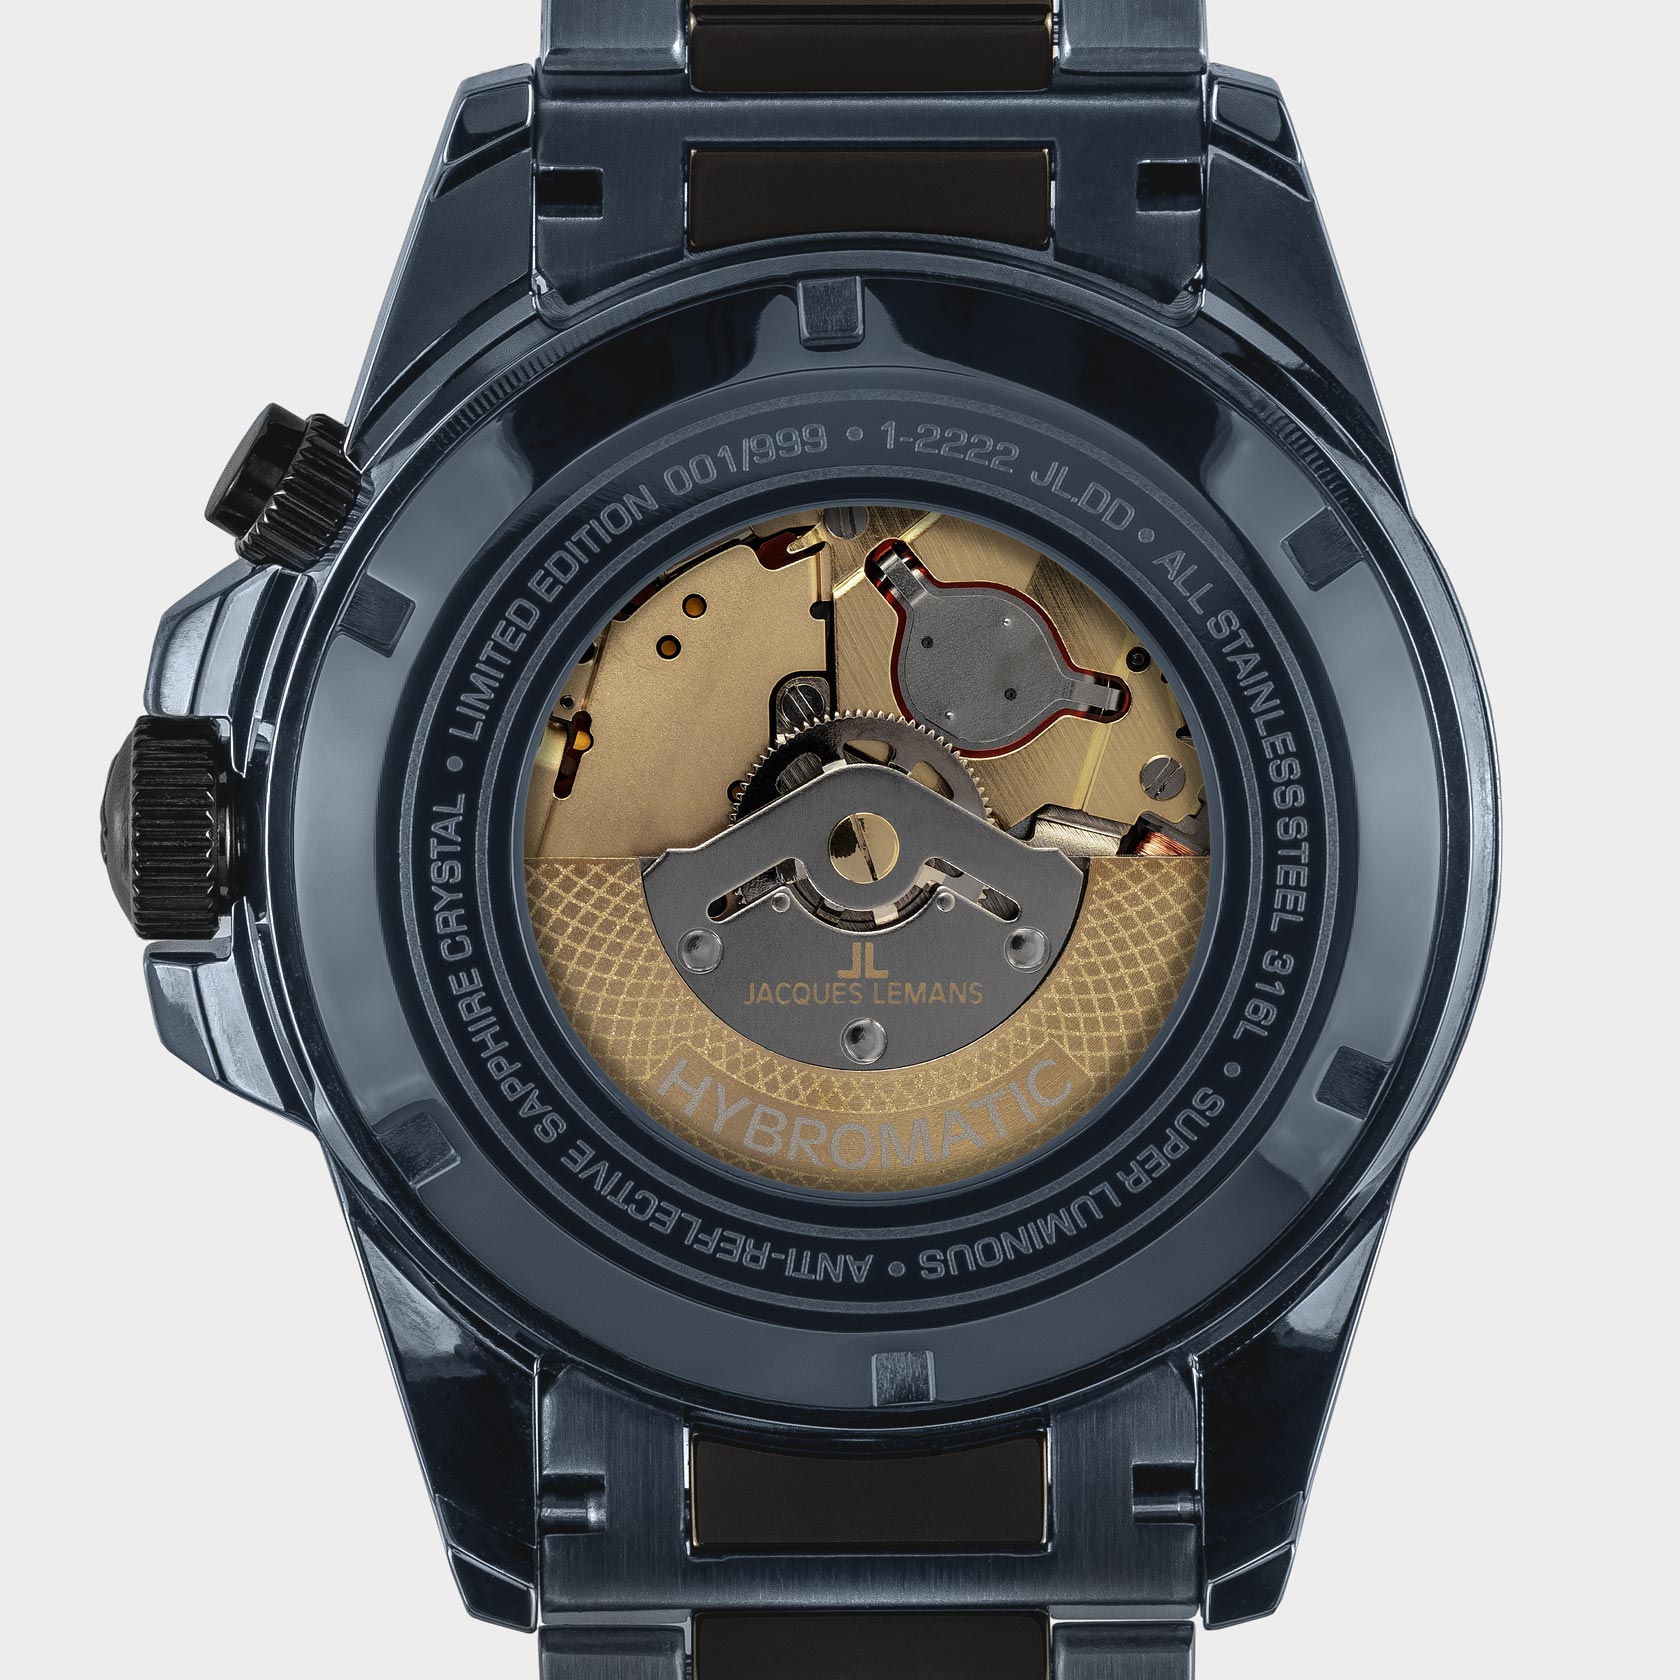 Jacques Lemans "Hybromatic"Limited Edition 